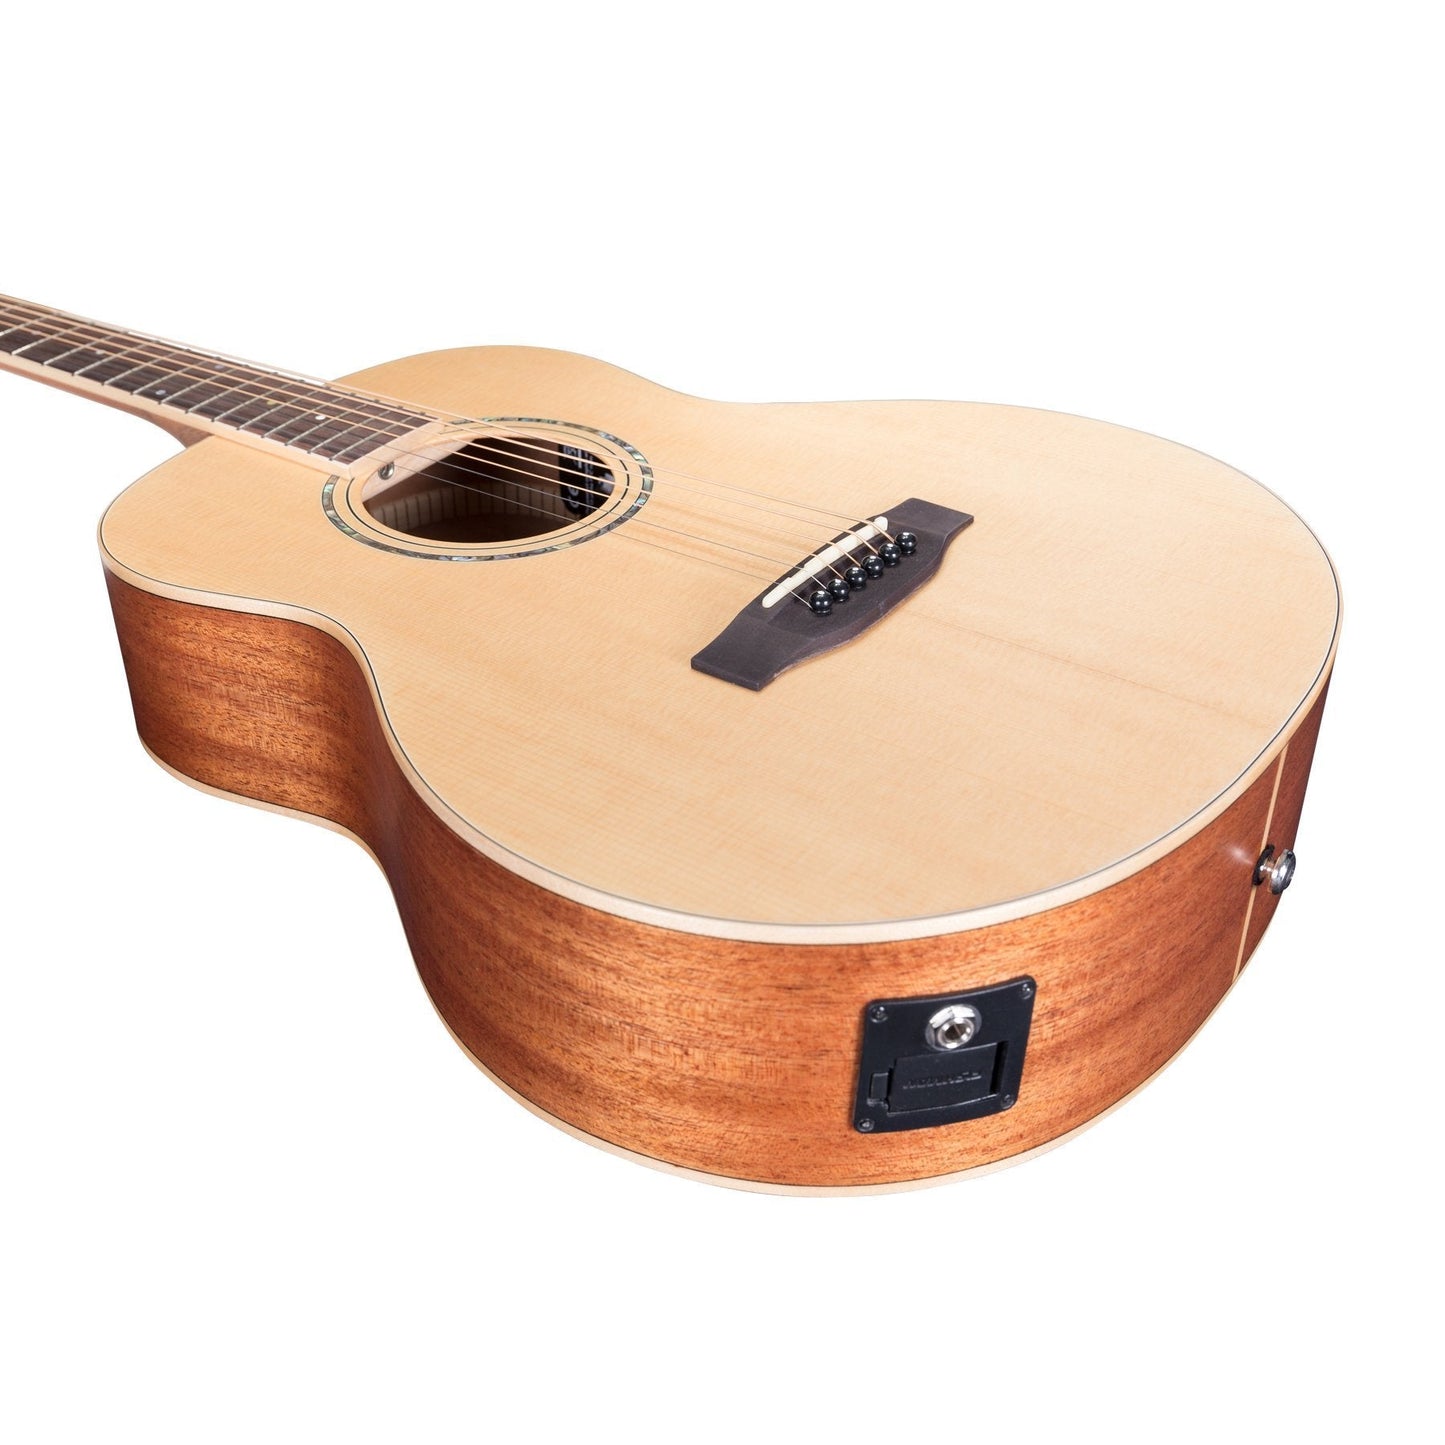 Timberidge '1 Series' Left Handed Solid Top Acoustic-Electric TS-Mini Guitar (Natural Satin)